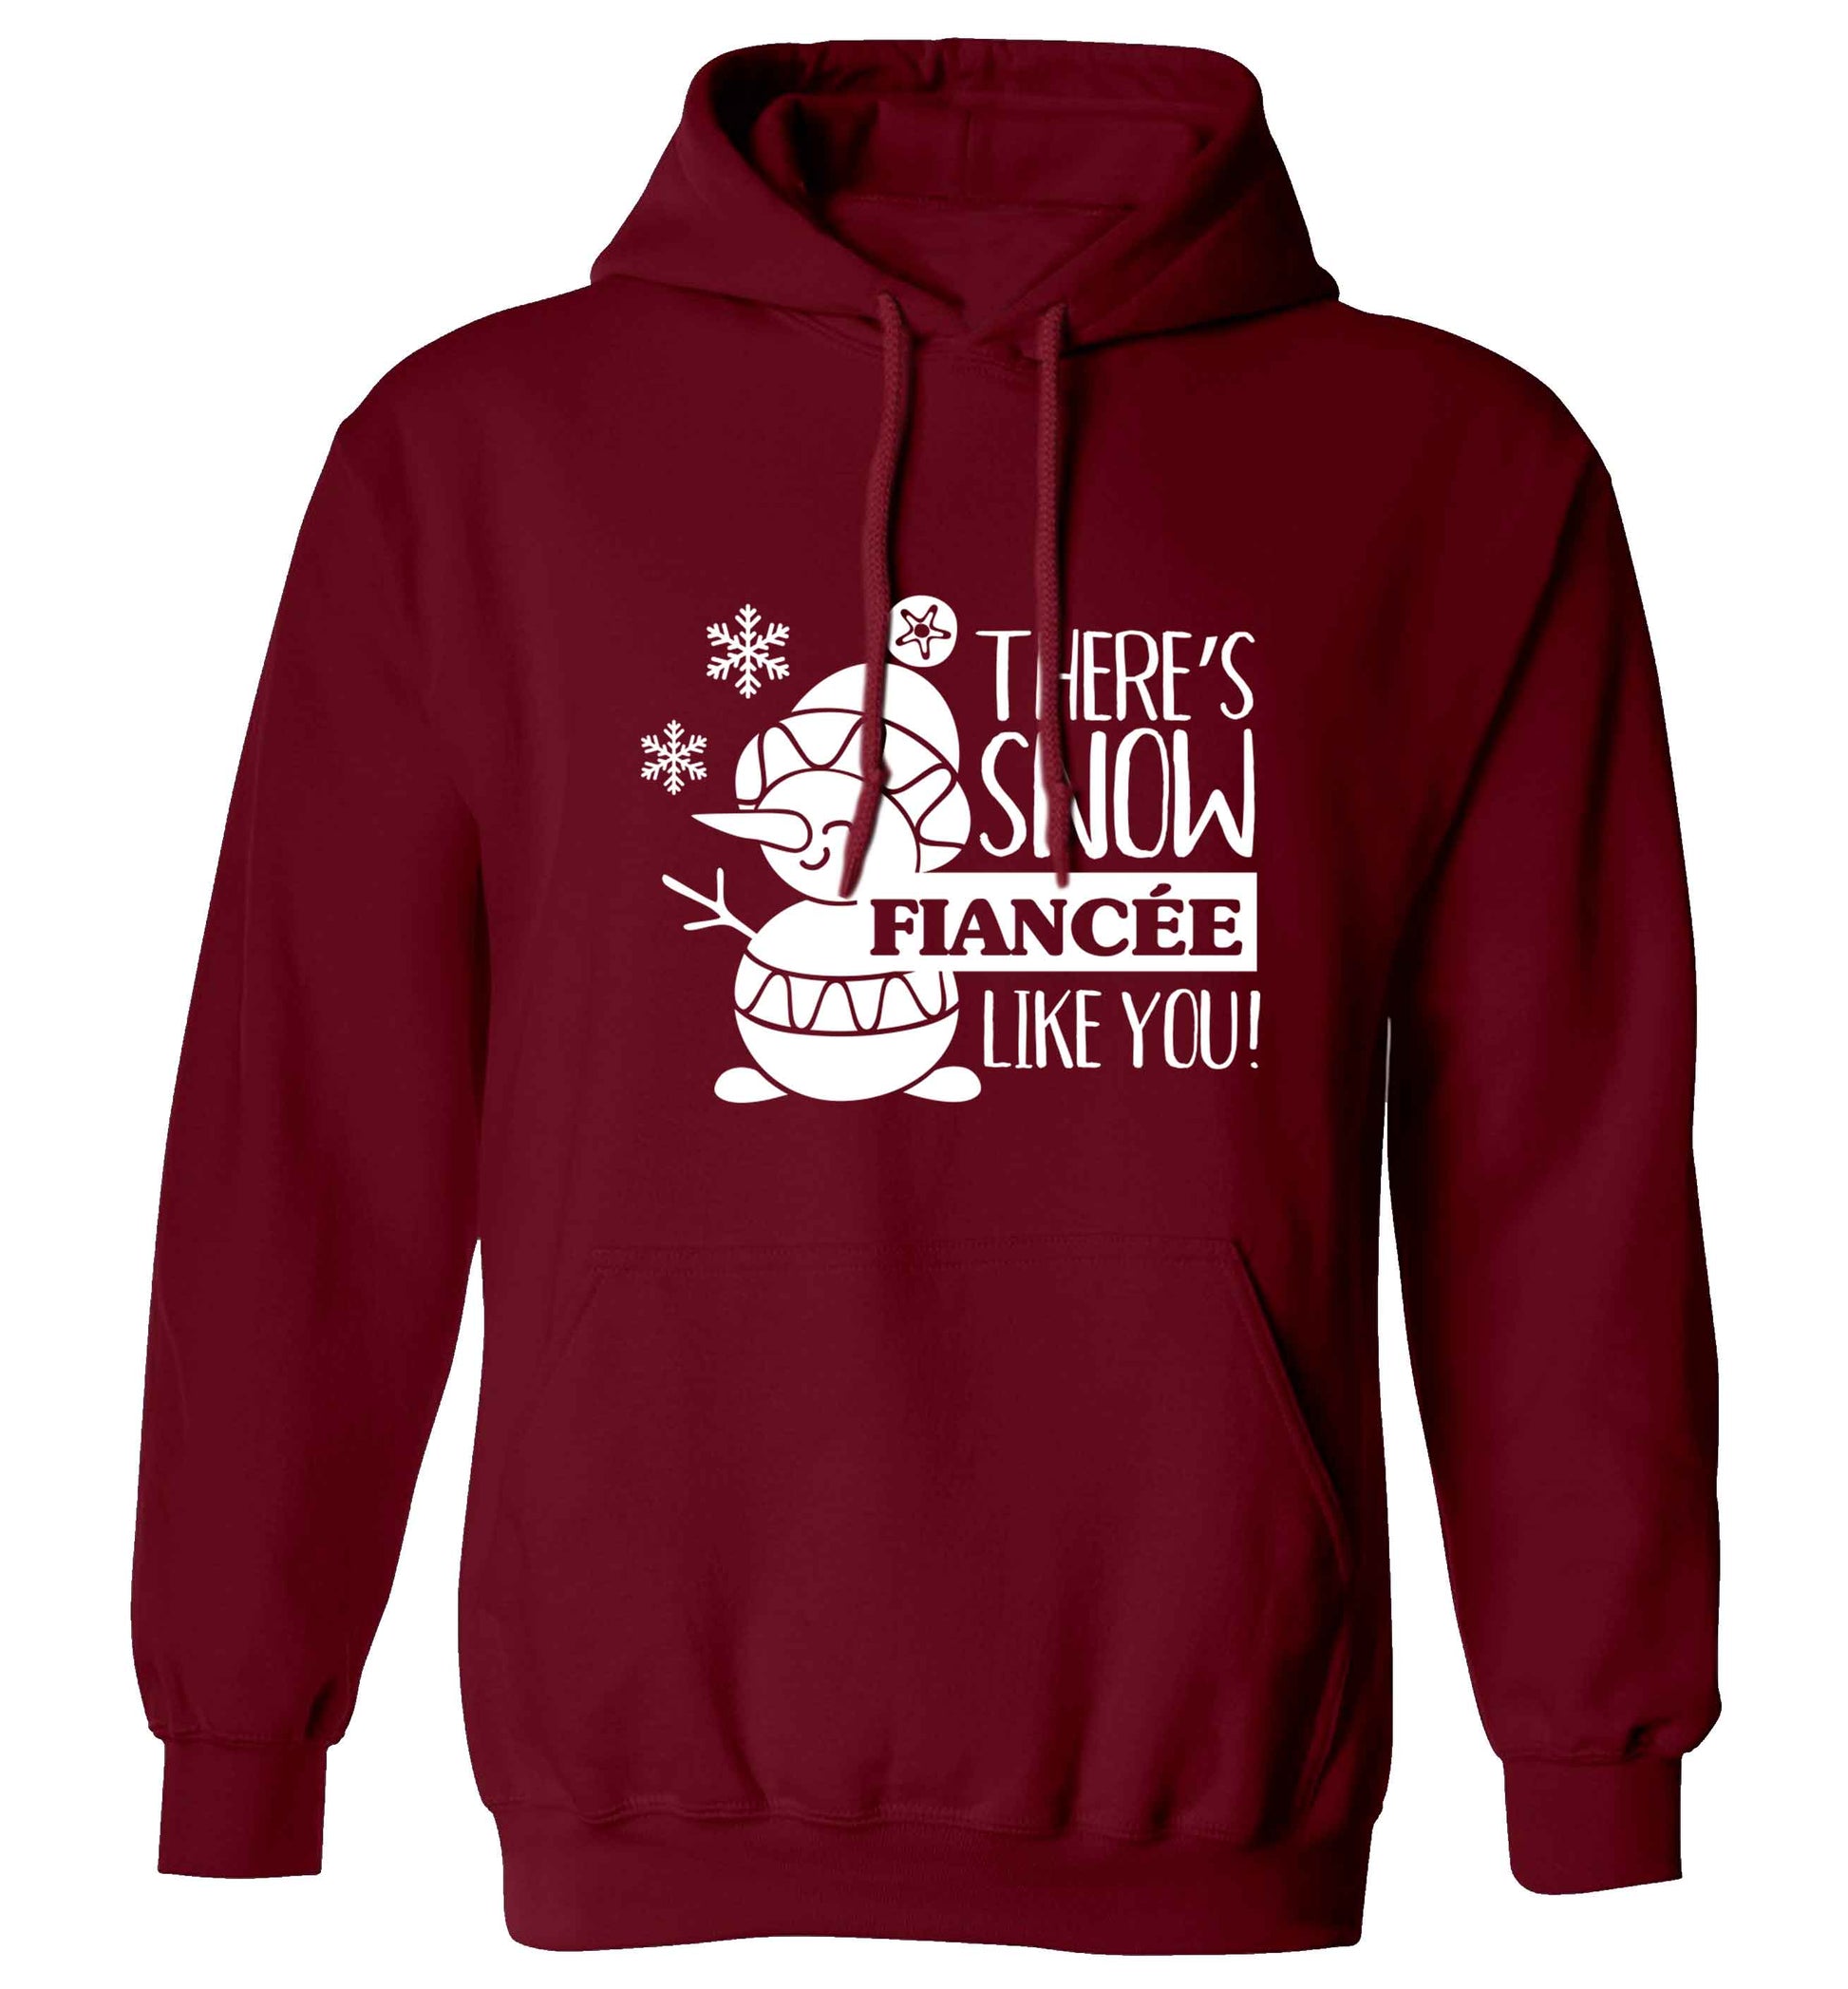 There's snow fiancee like you adults unisex maroon hoodie 2XL